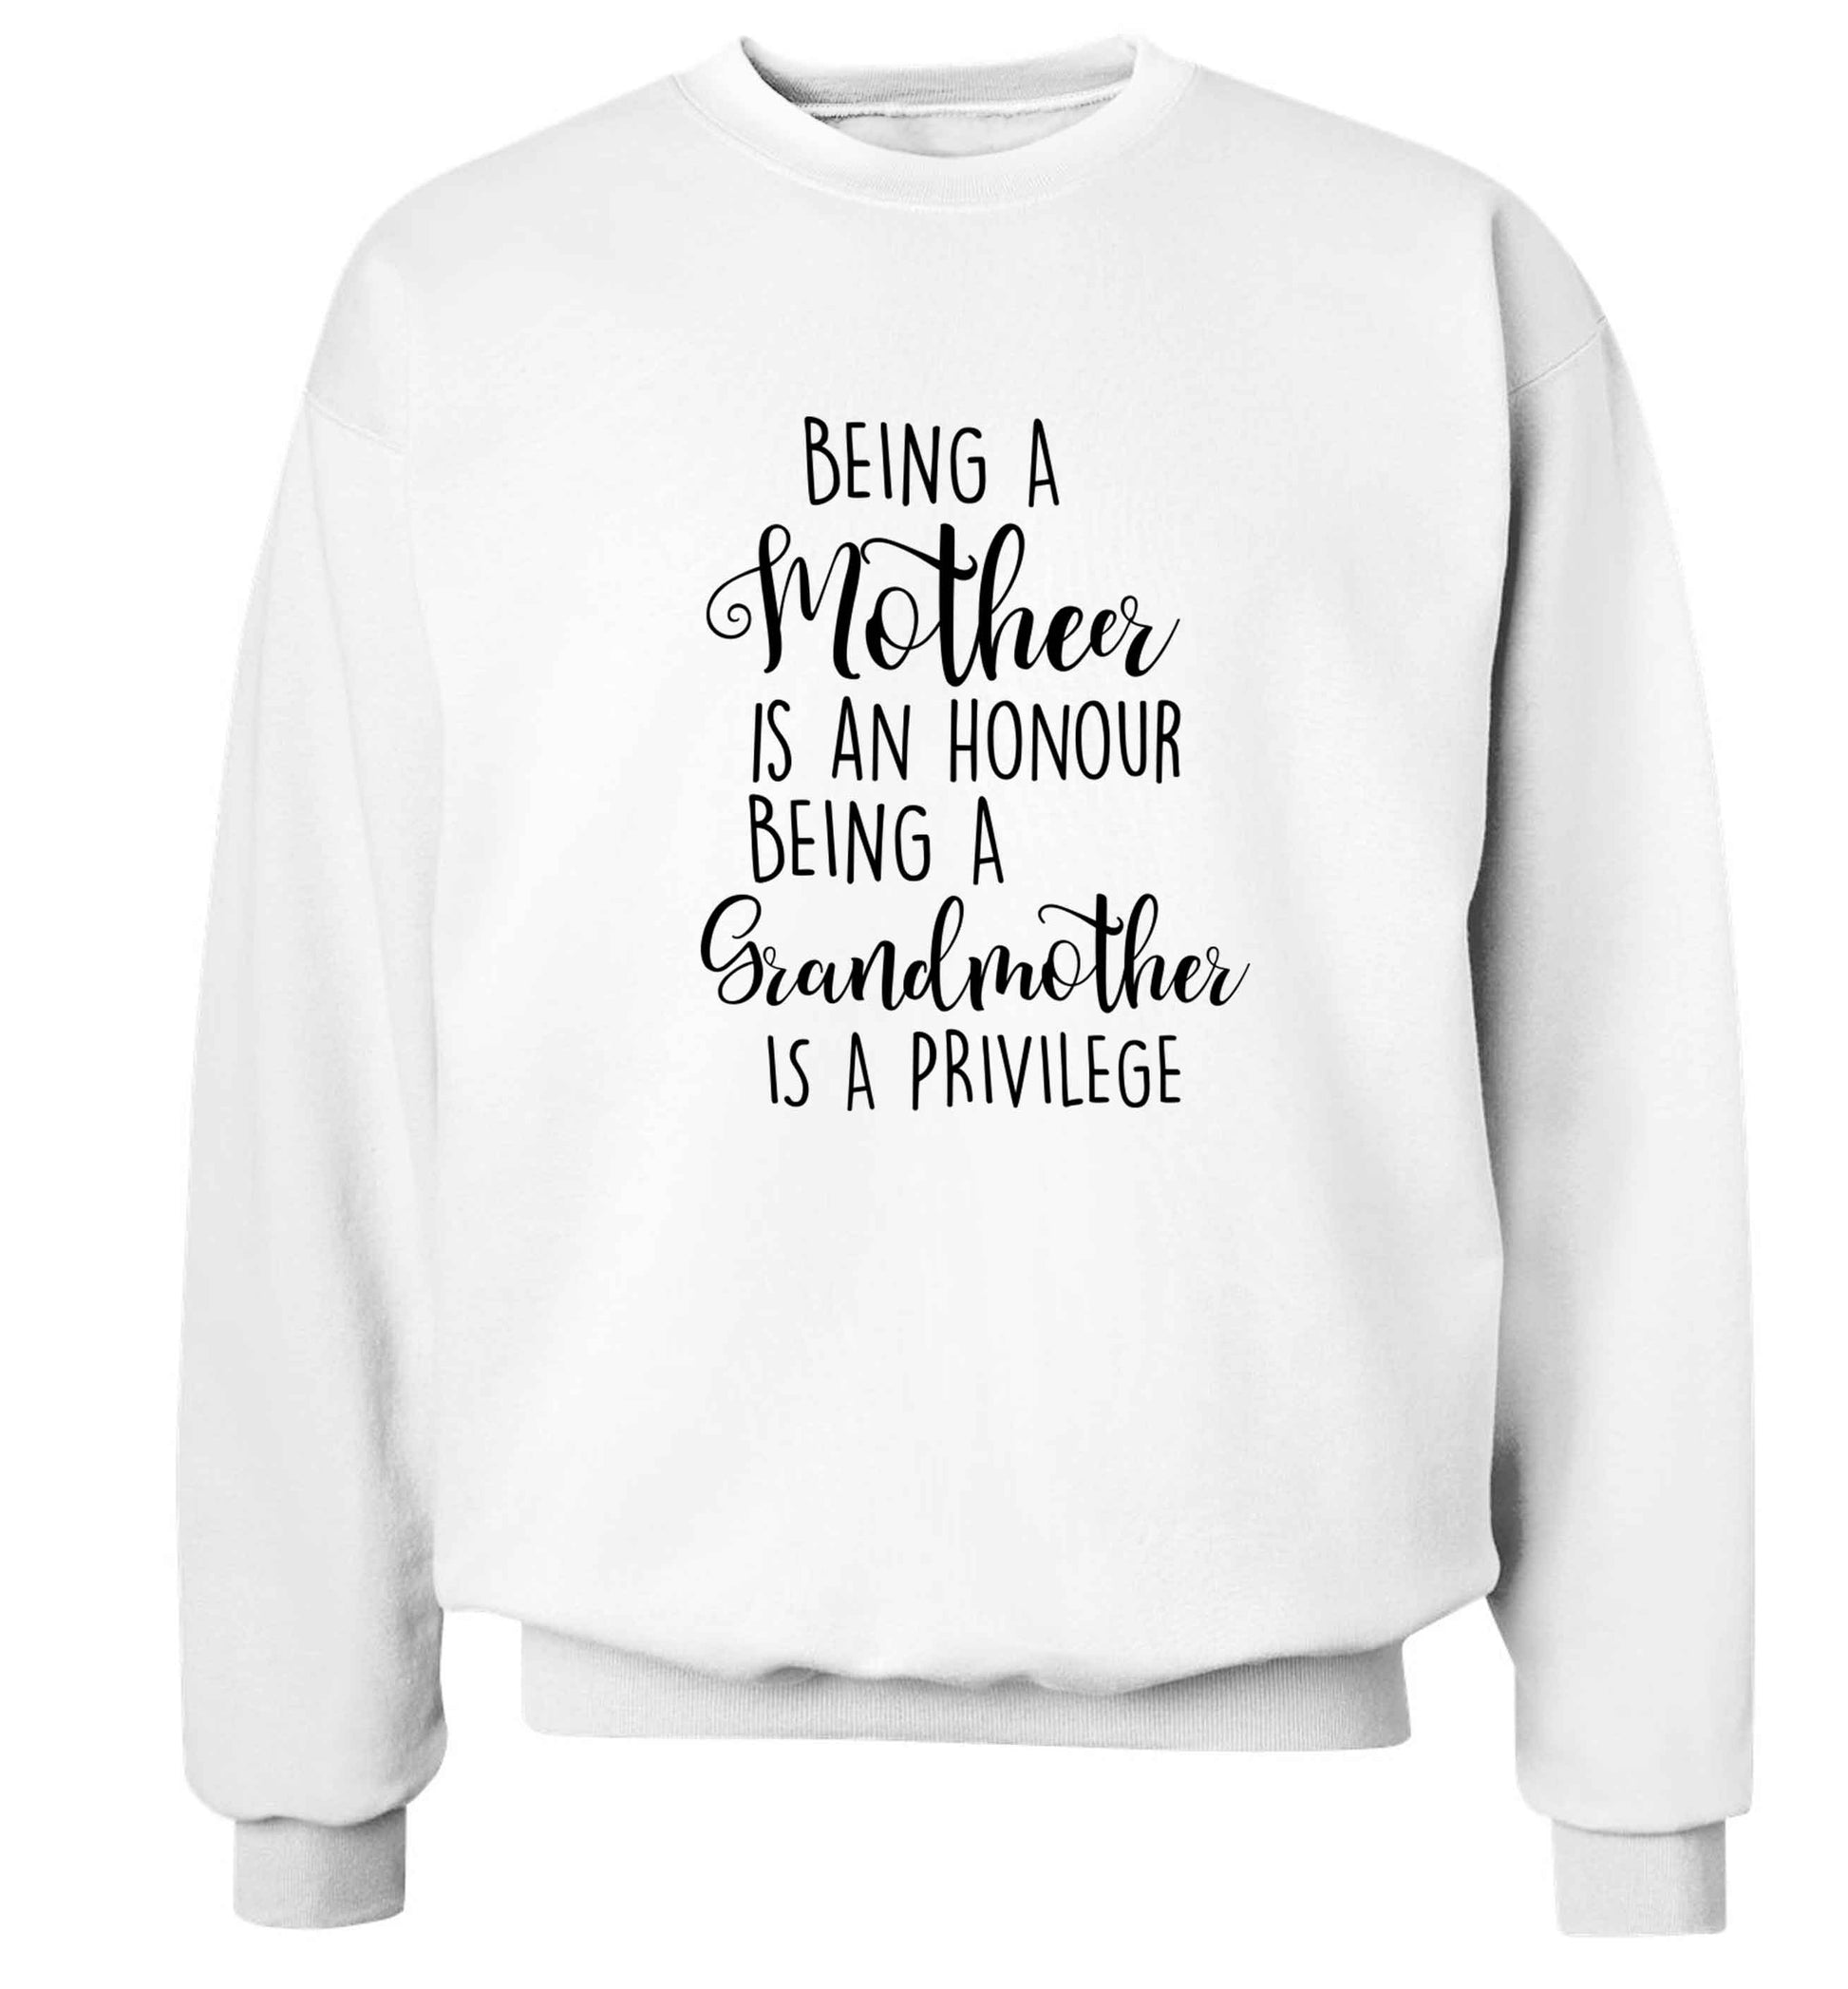 Being a mother is an honour being an grandmother is a privilege Adult's unisex white Sweater 2XL